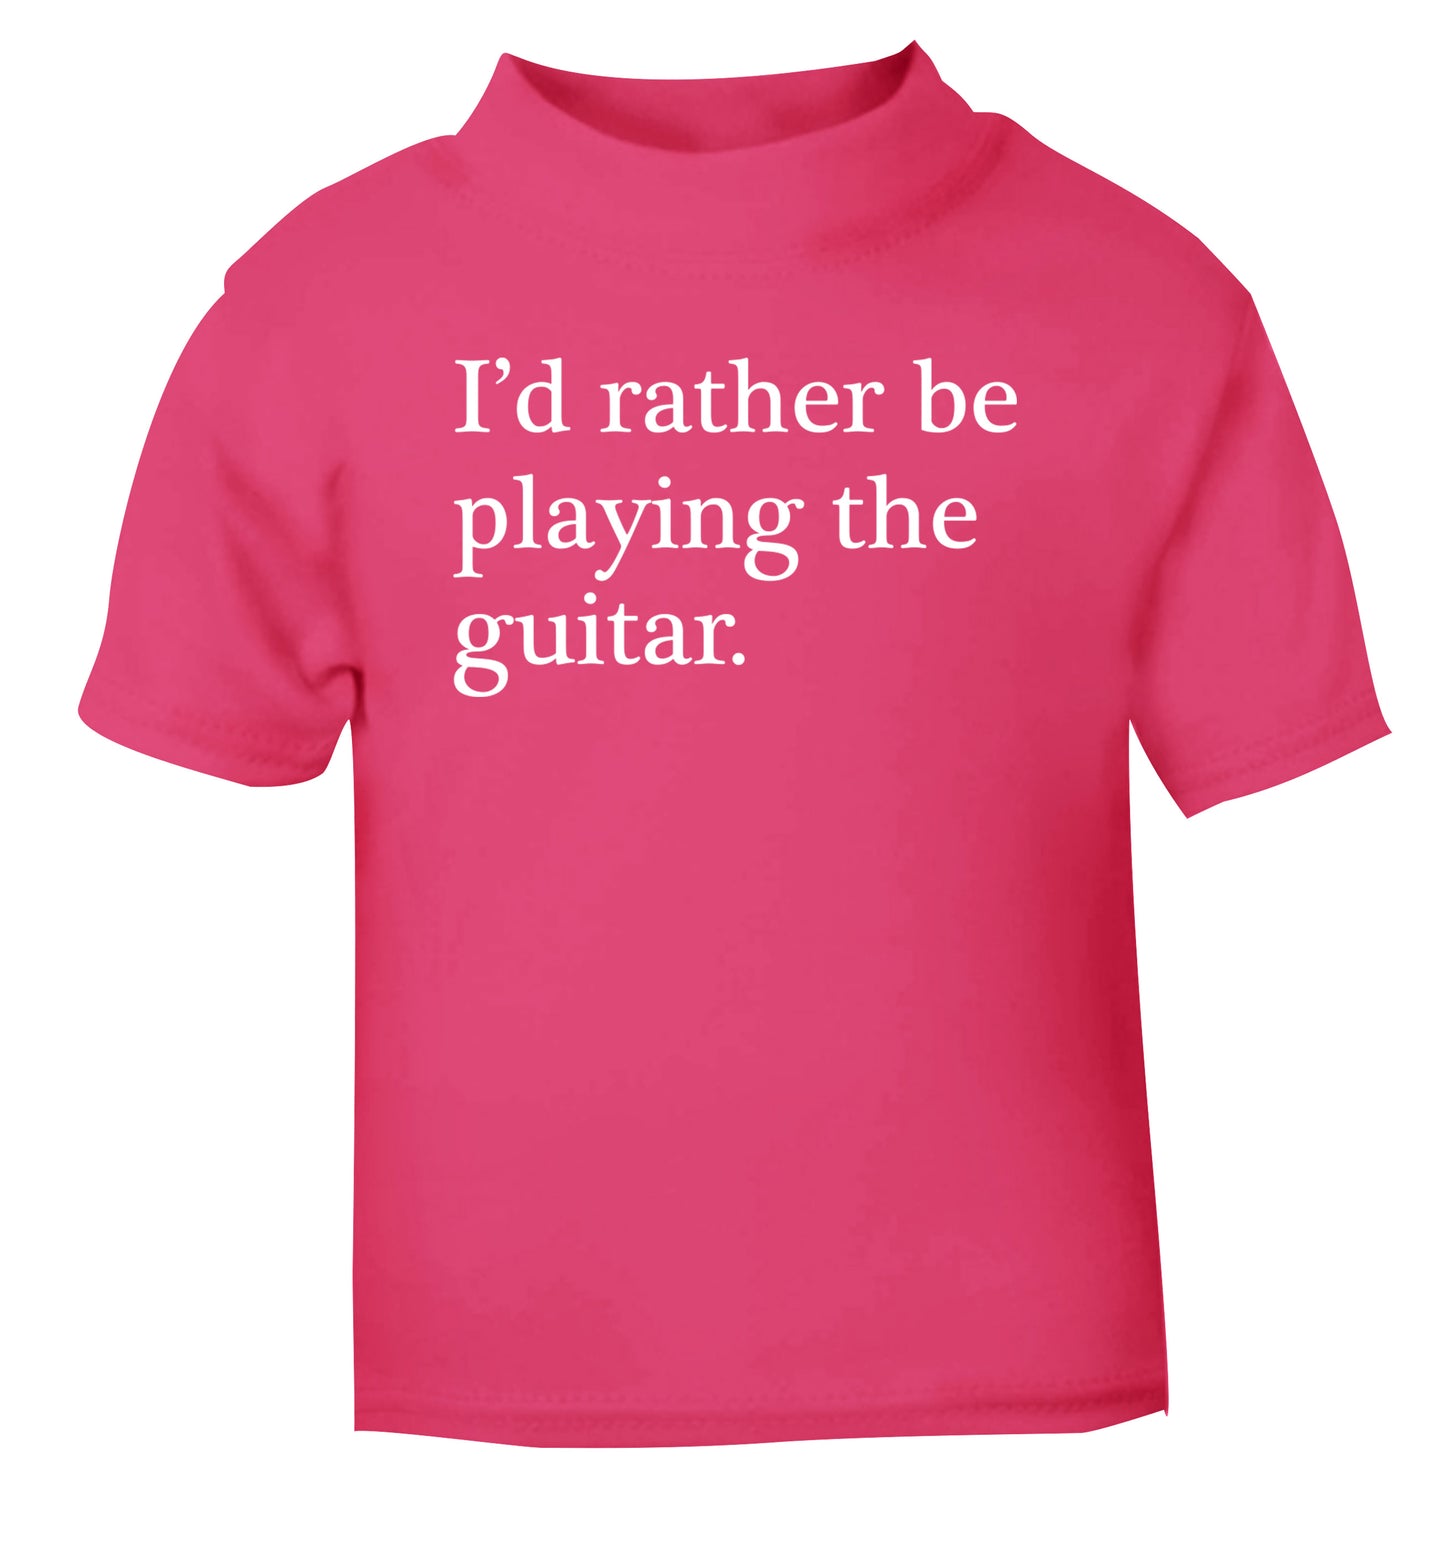 I'd rather be playing the guitar pink Baby Toddler Tshirt 2 Years